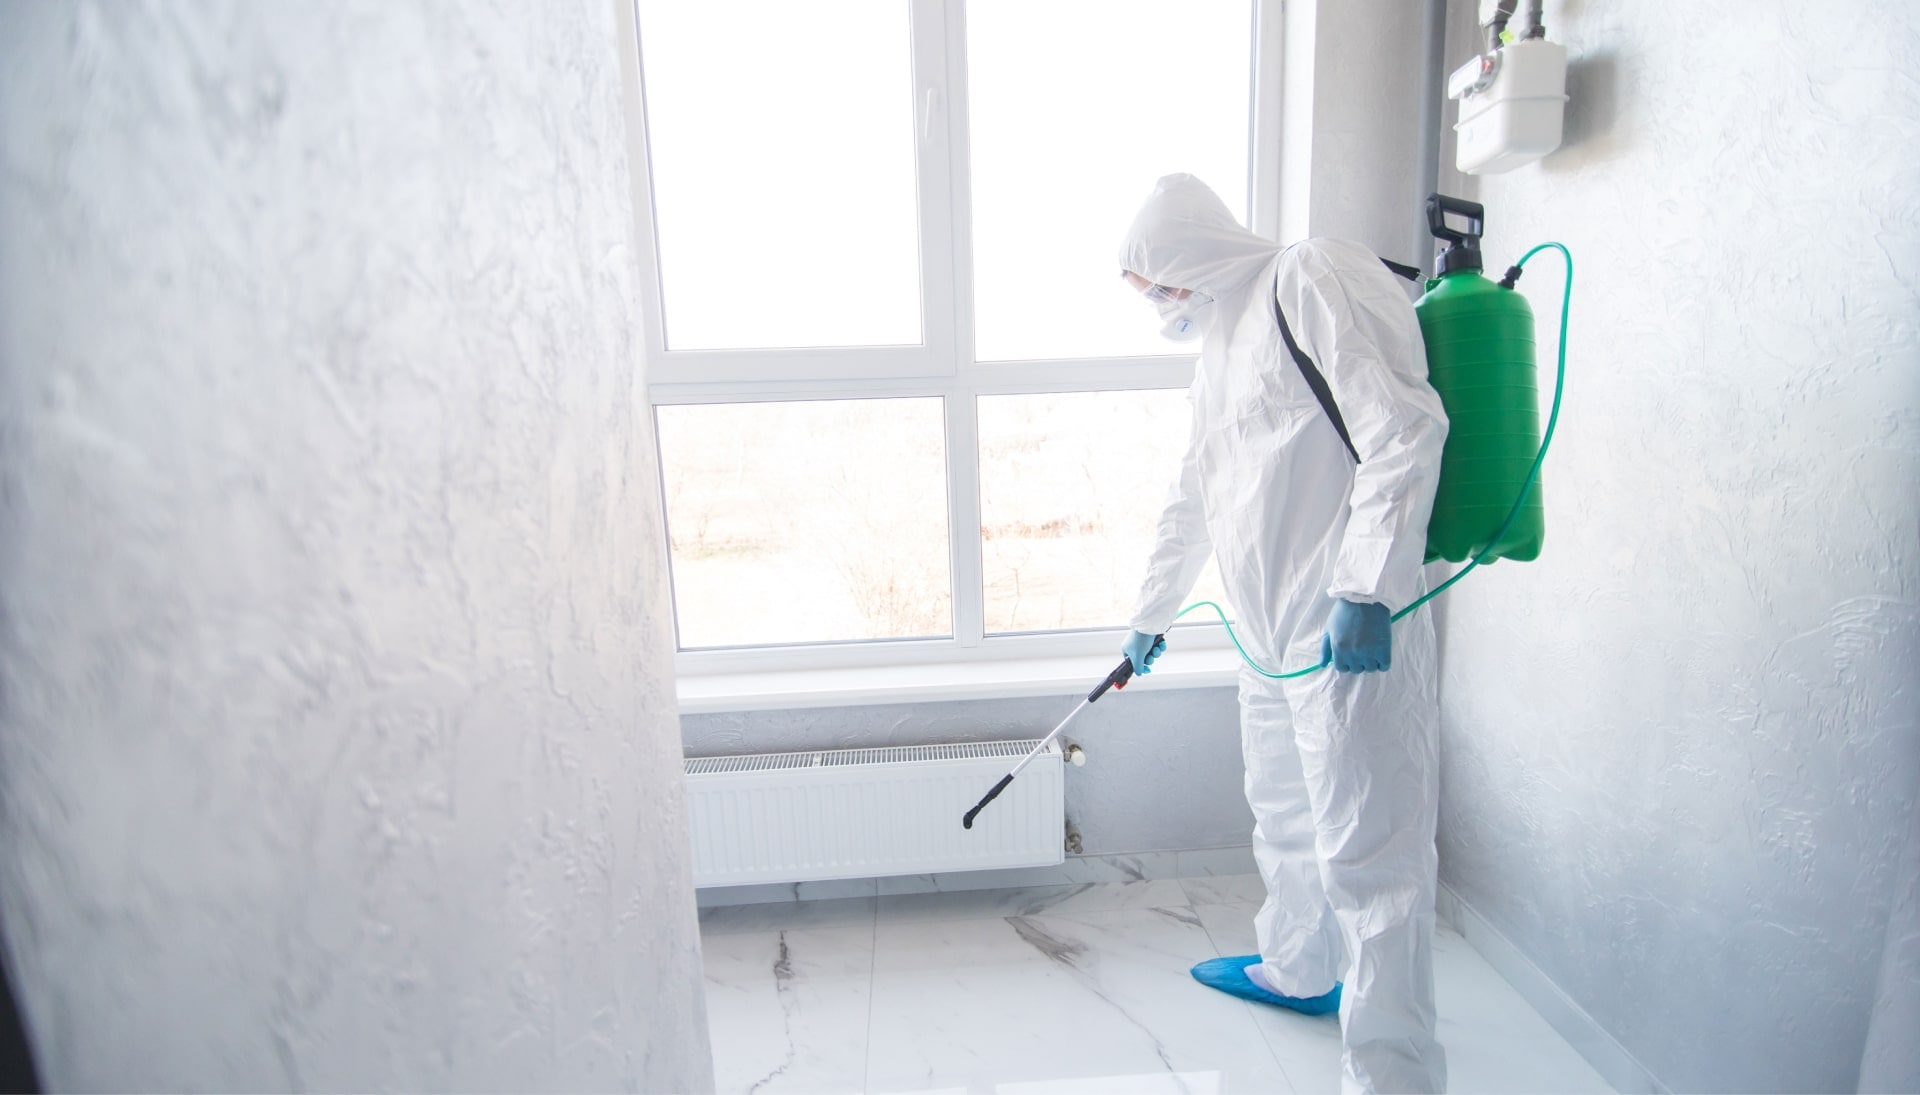 We provide the highest-quality mold inspection, testing, and removal services in the Peoria, Arizona area.